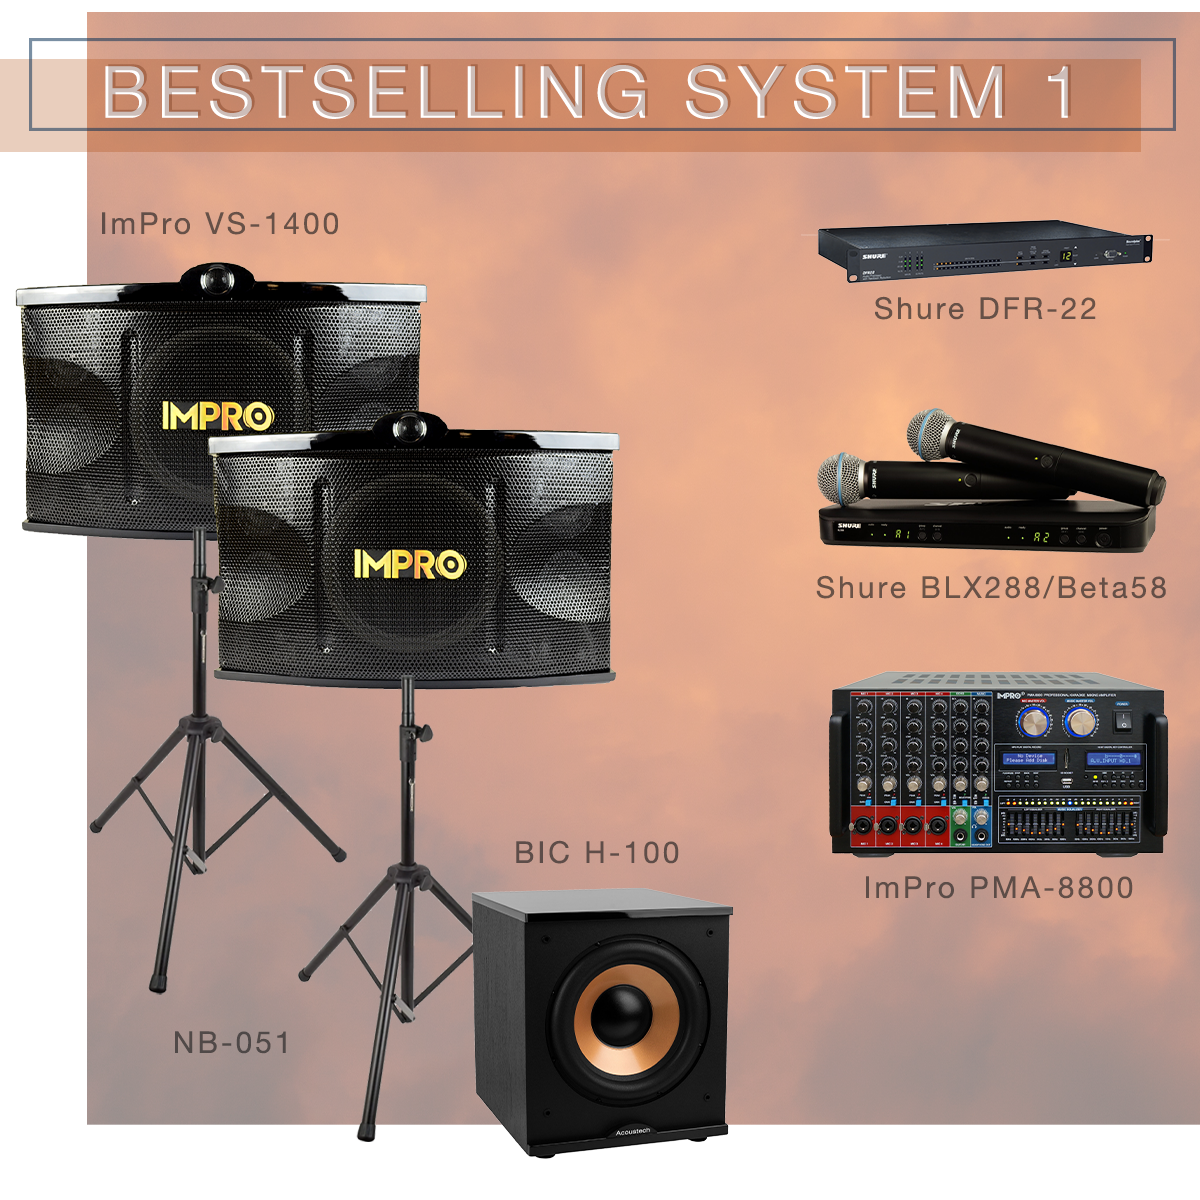 Best Selling System 1 Karaoke Package with ImPro Speakers with Stands, Mixing Amplifier and Shure Microphones